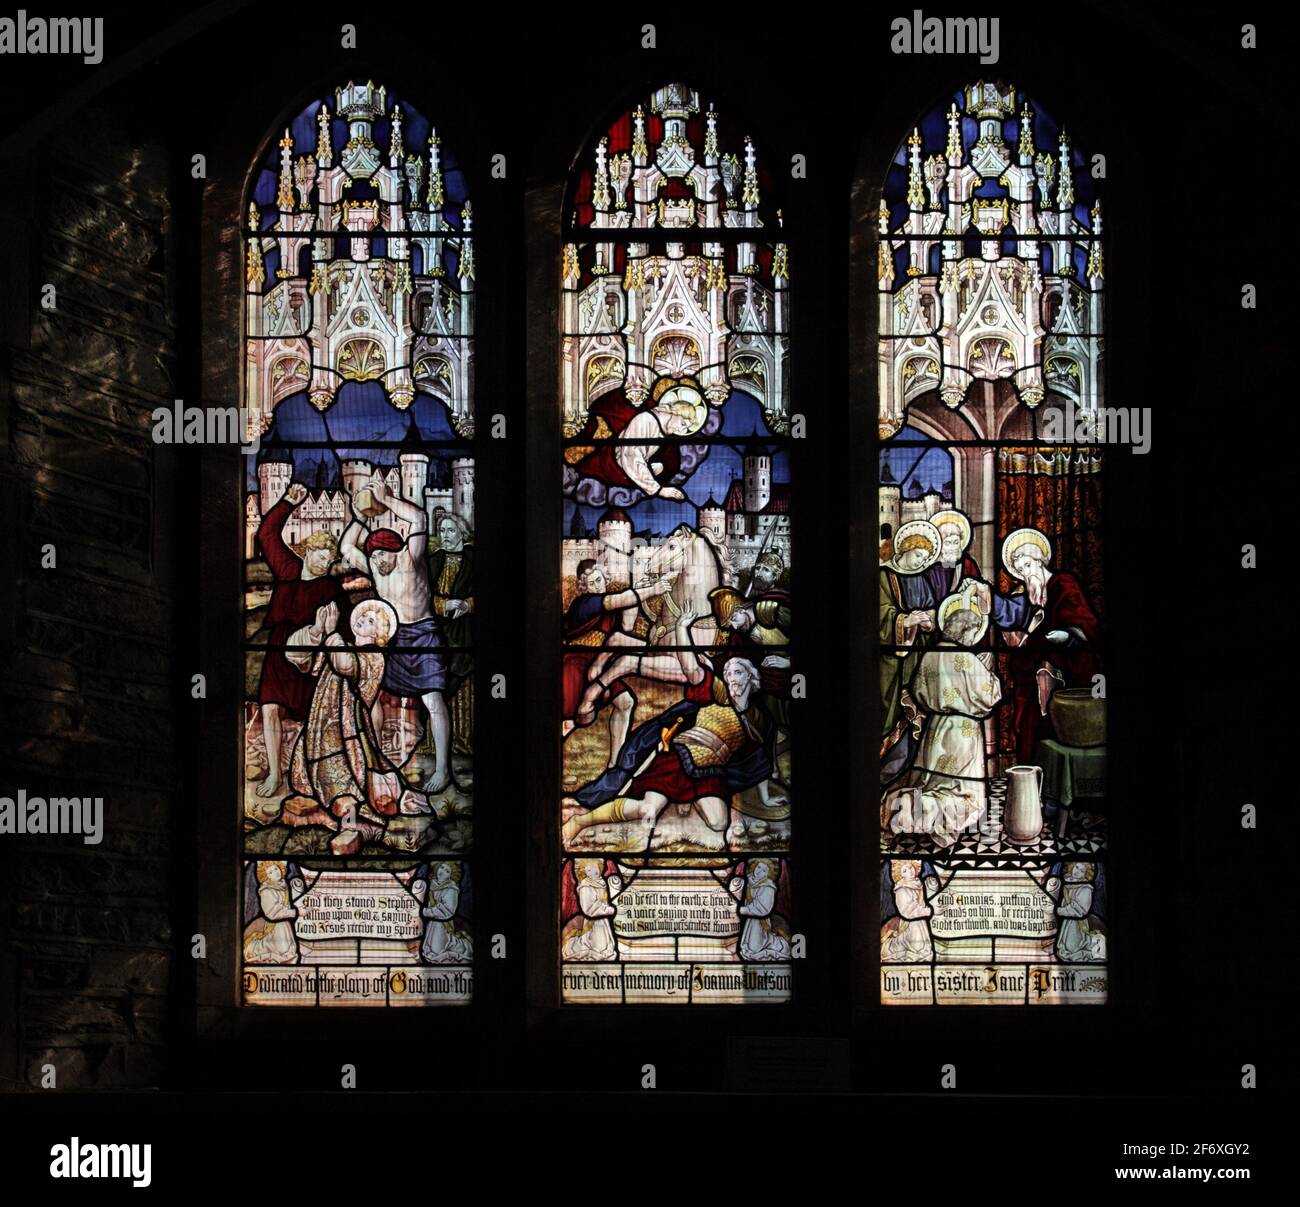 Stained glass window by Burlison and Grylls depicting the martyrdom of St Stephen, the conversion of Saul & Ananias of Damascus, Watermillock Church Stock Photo